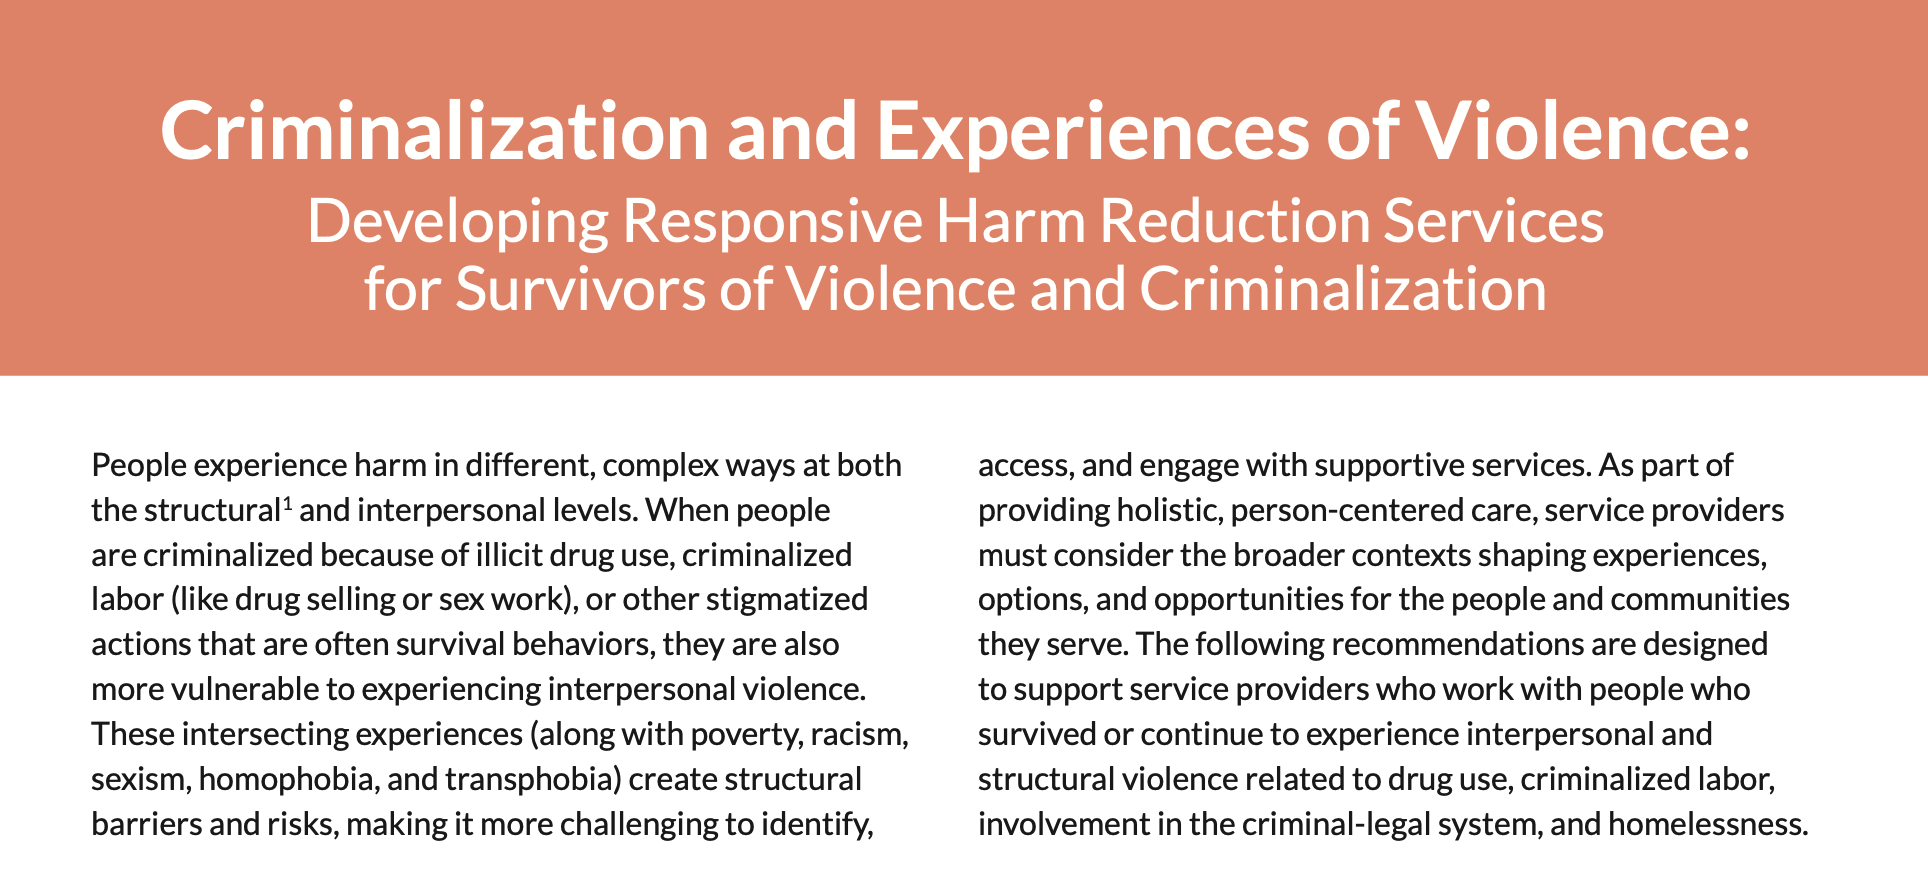 Criminalization and Experiences of Violence: Developing Responsive Harm Reduction Services for Victims of Violence and Criminalization